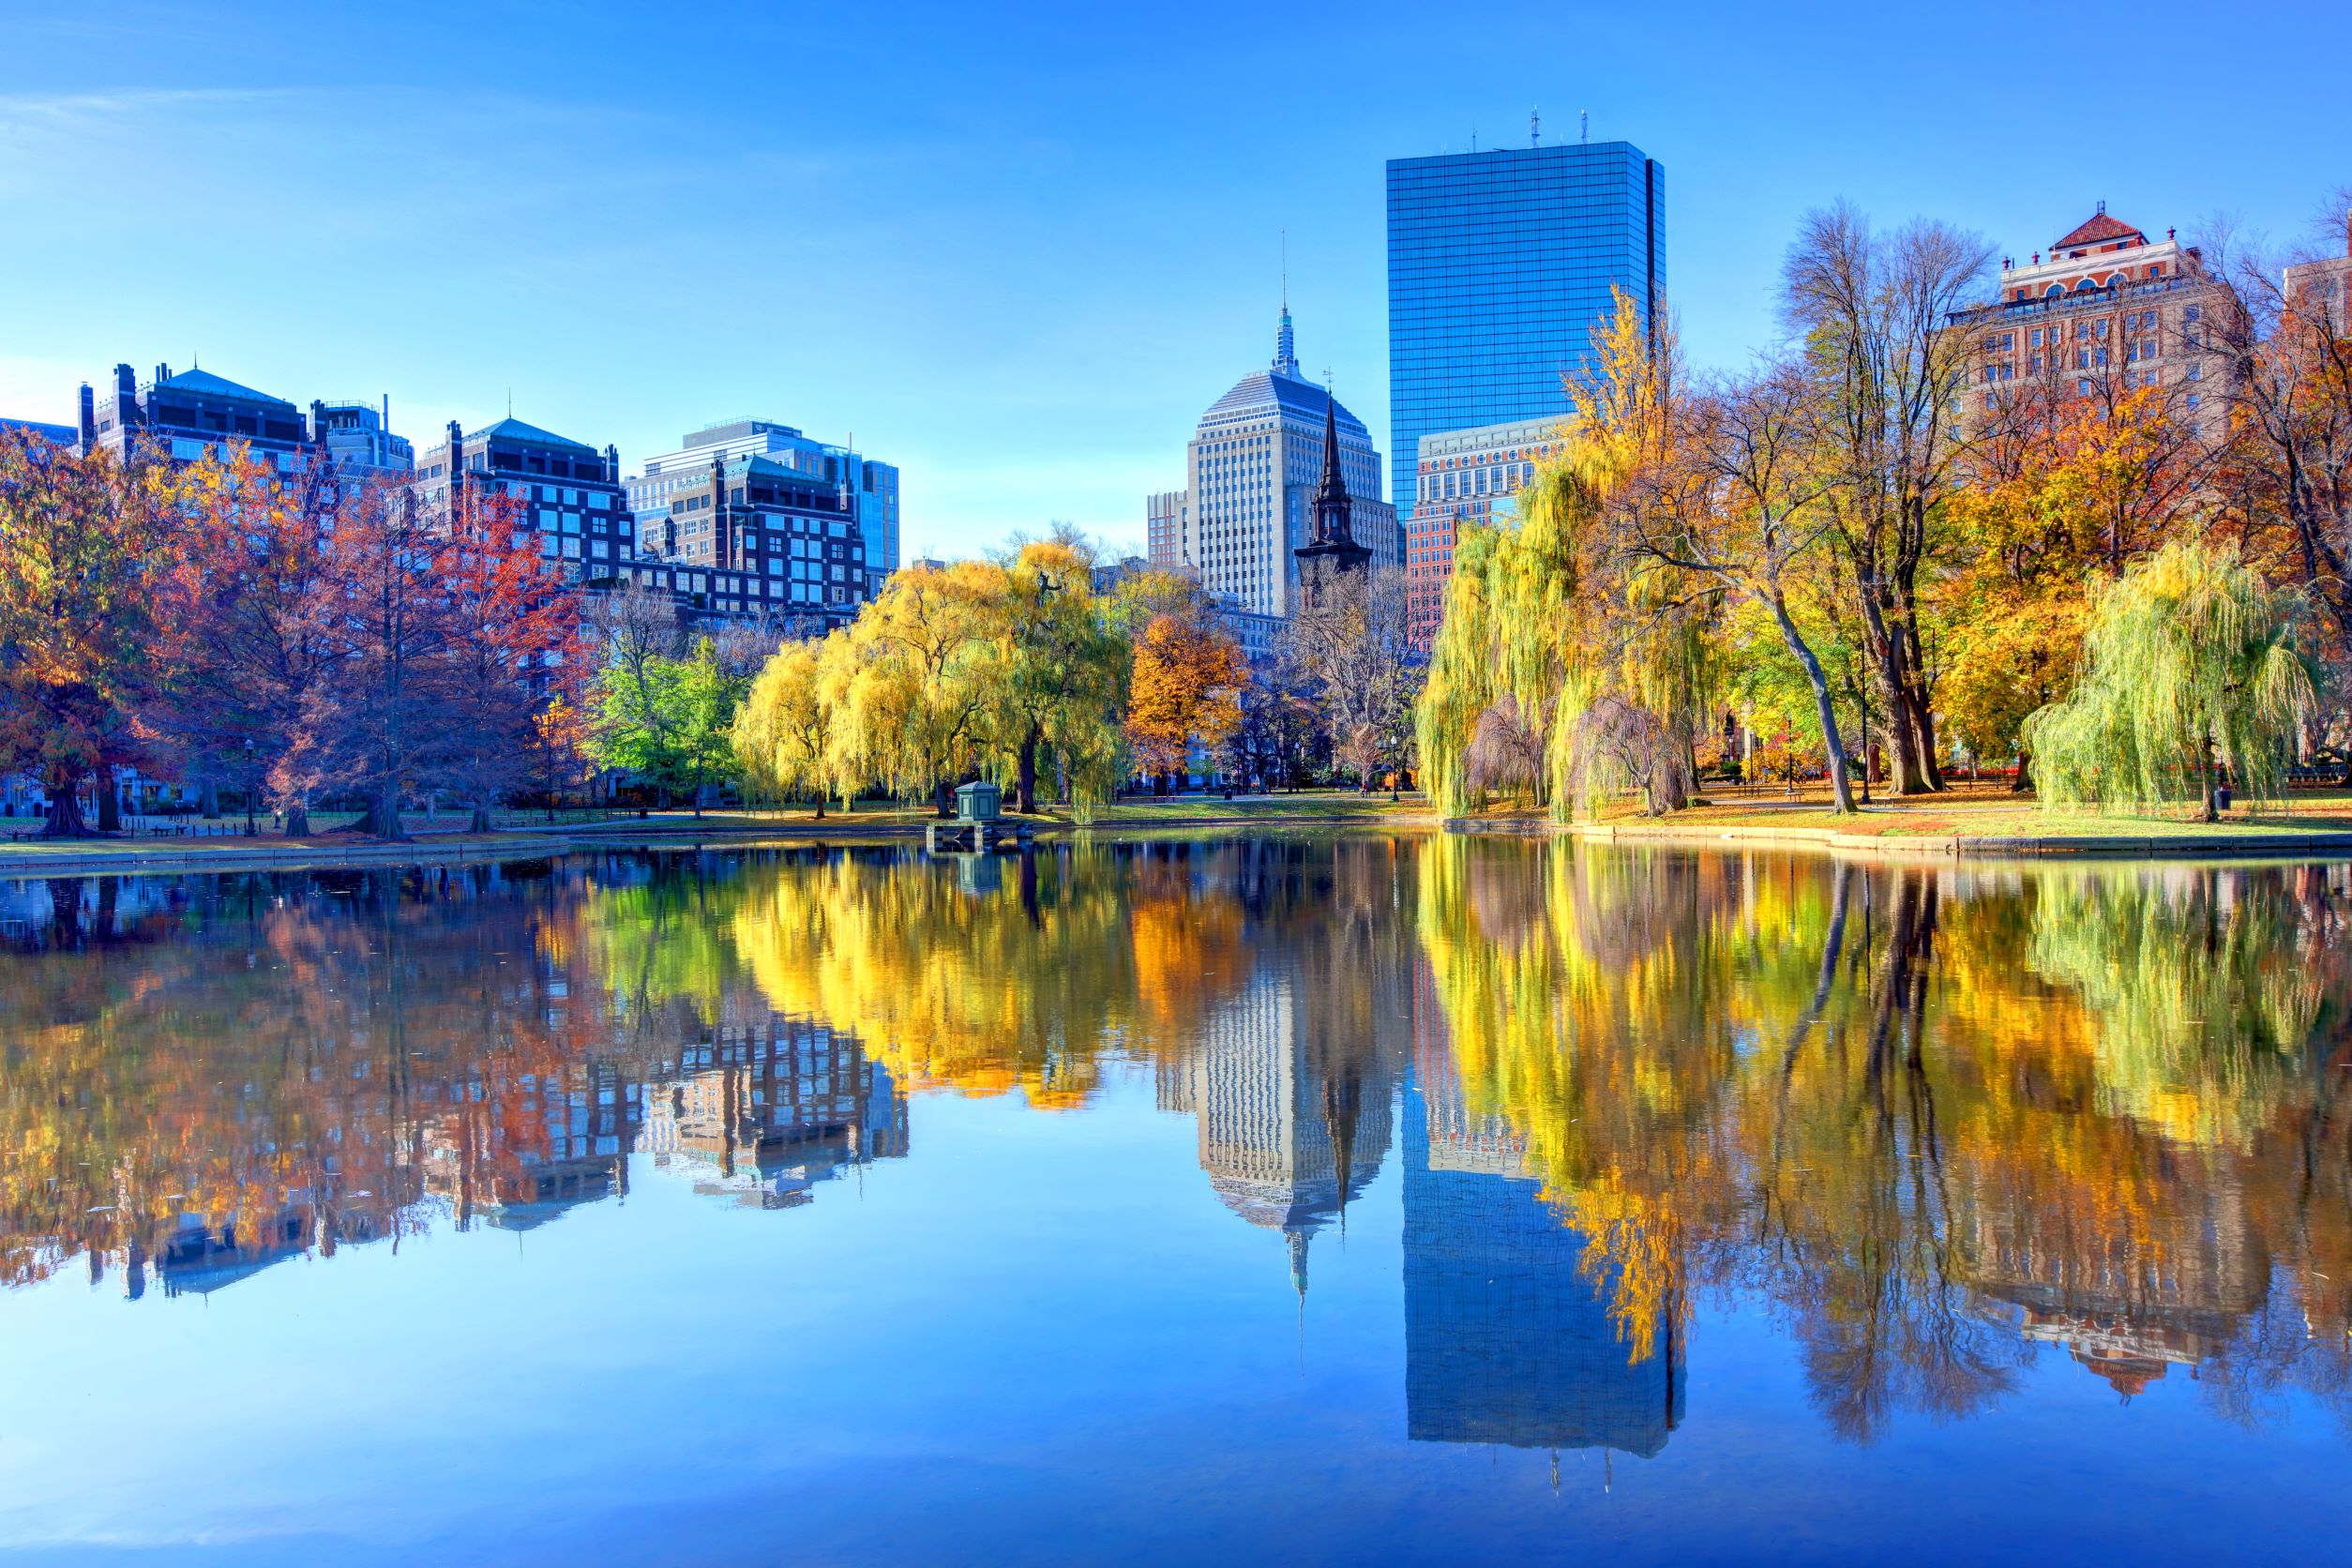 Best Places to See Fall Foliage in Boston The Envoy Hotel